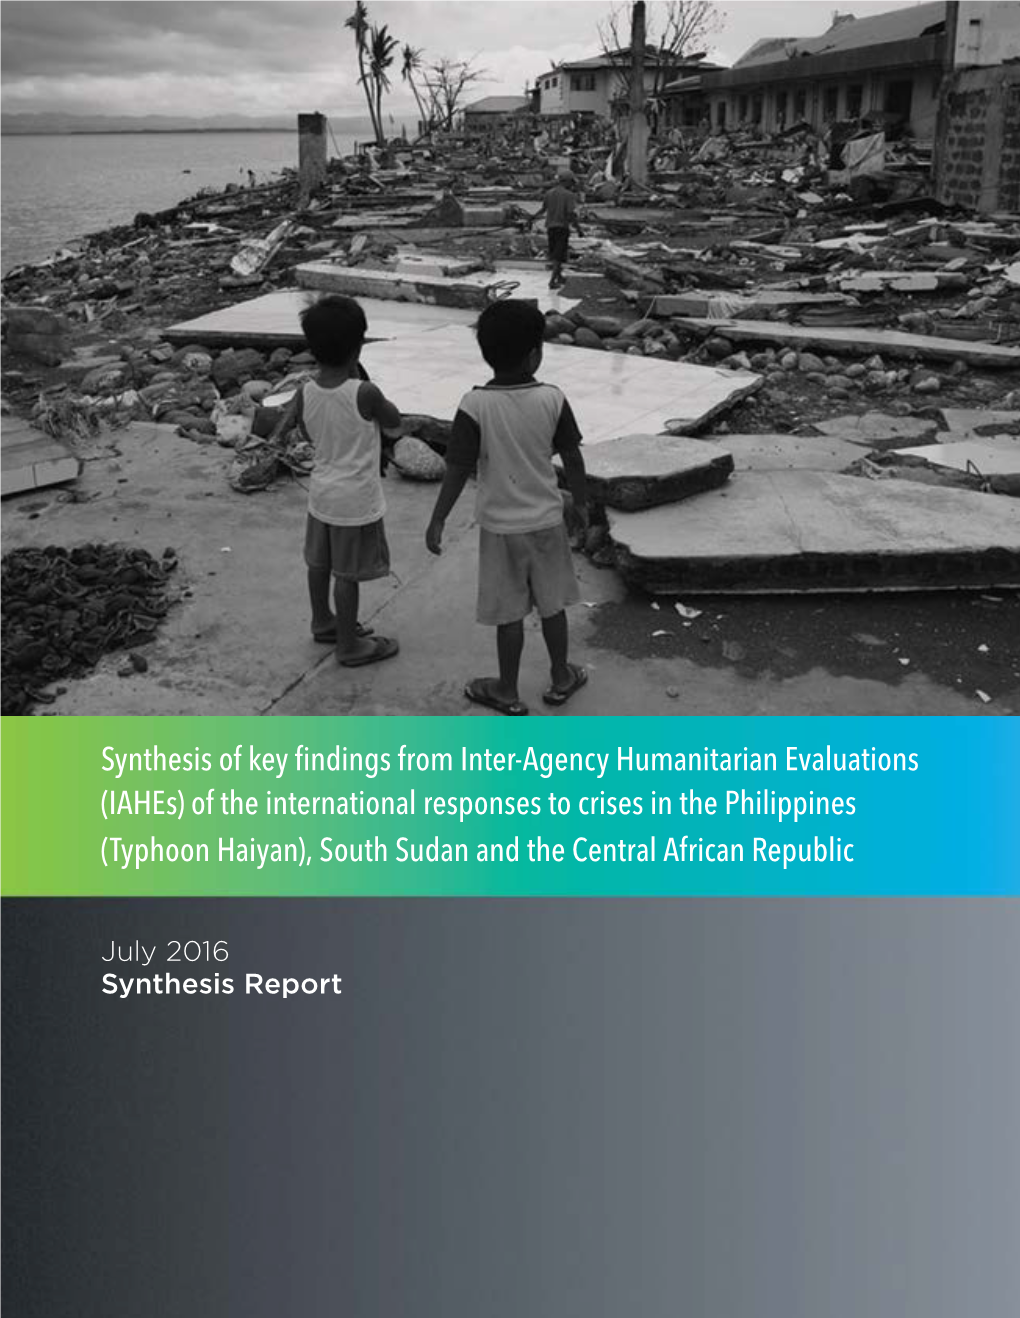 Synthesis of Key Findings from Inter-Agency Humanitarian Evaluations